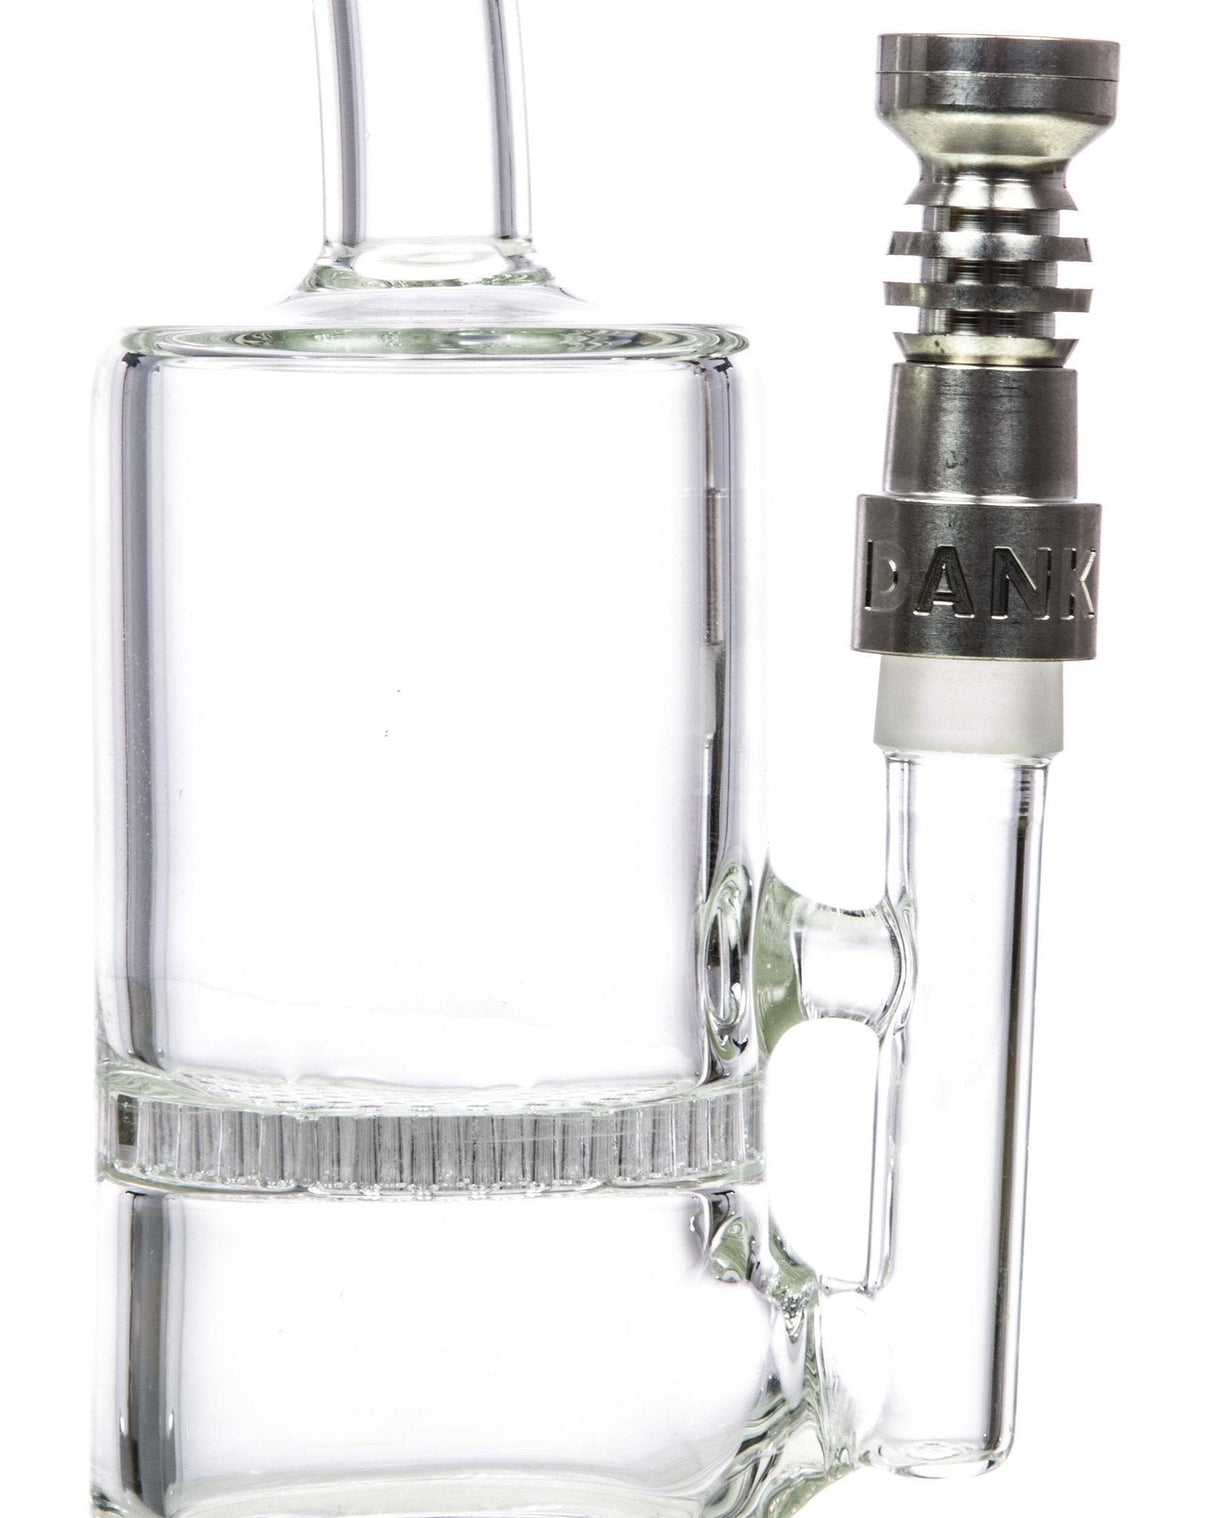 Dank Tools Domeless Titanium Nail with Showerhead Dish on Bong, 14mm/18mm, Close-up